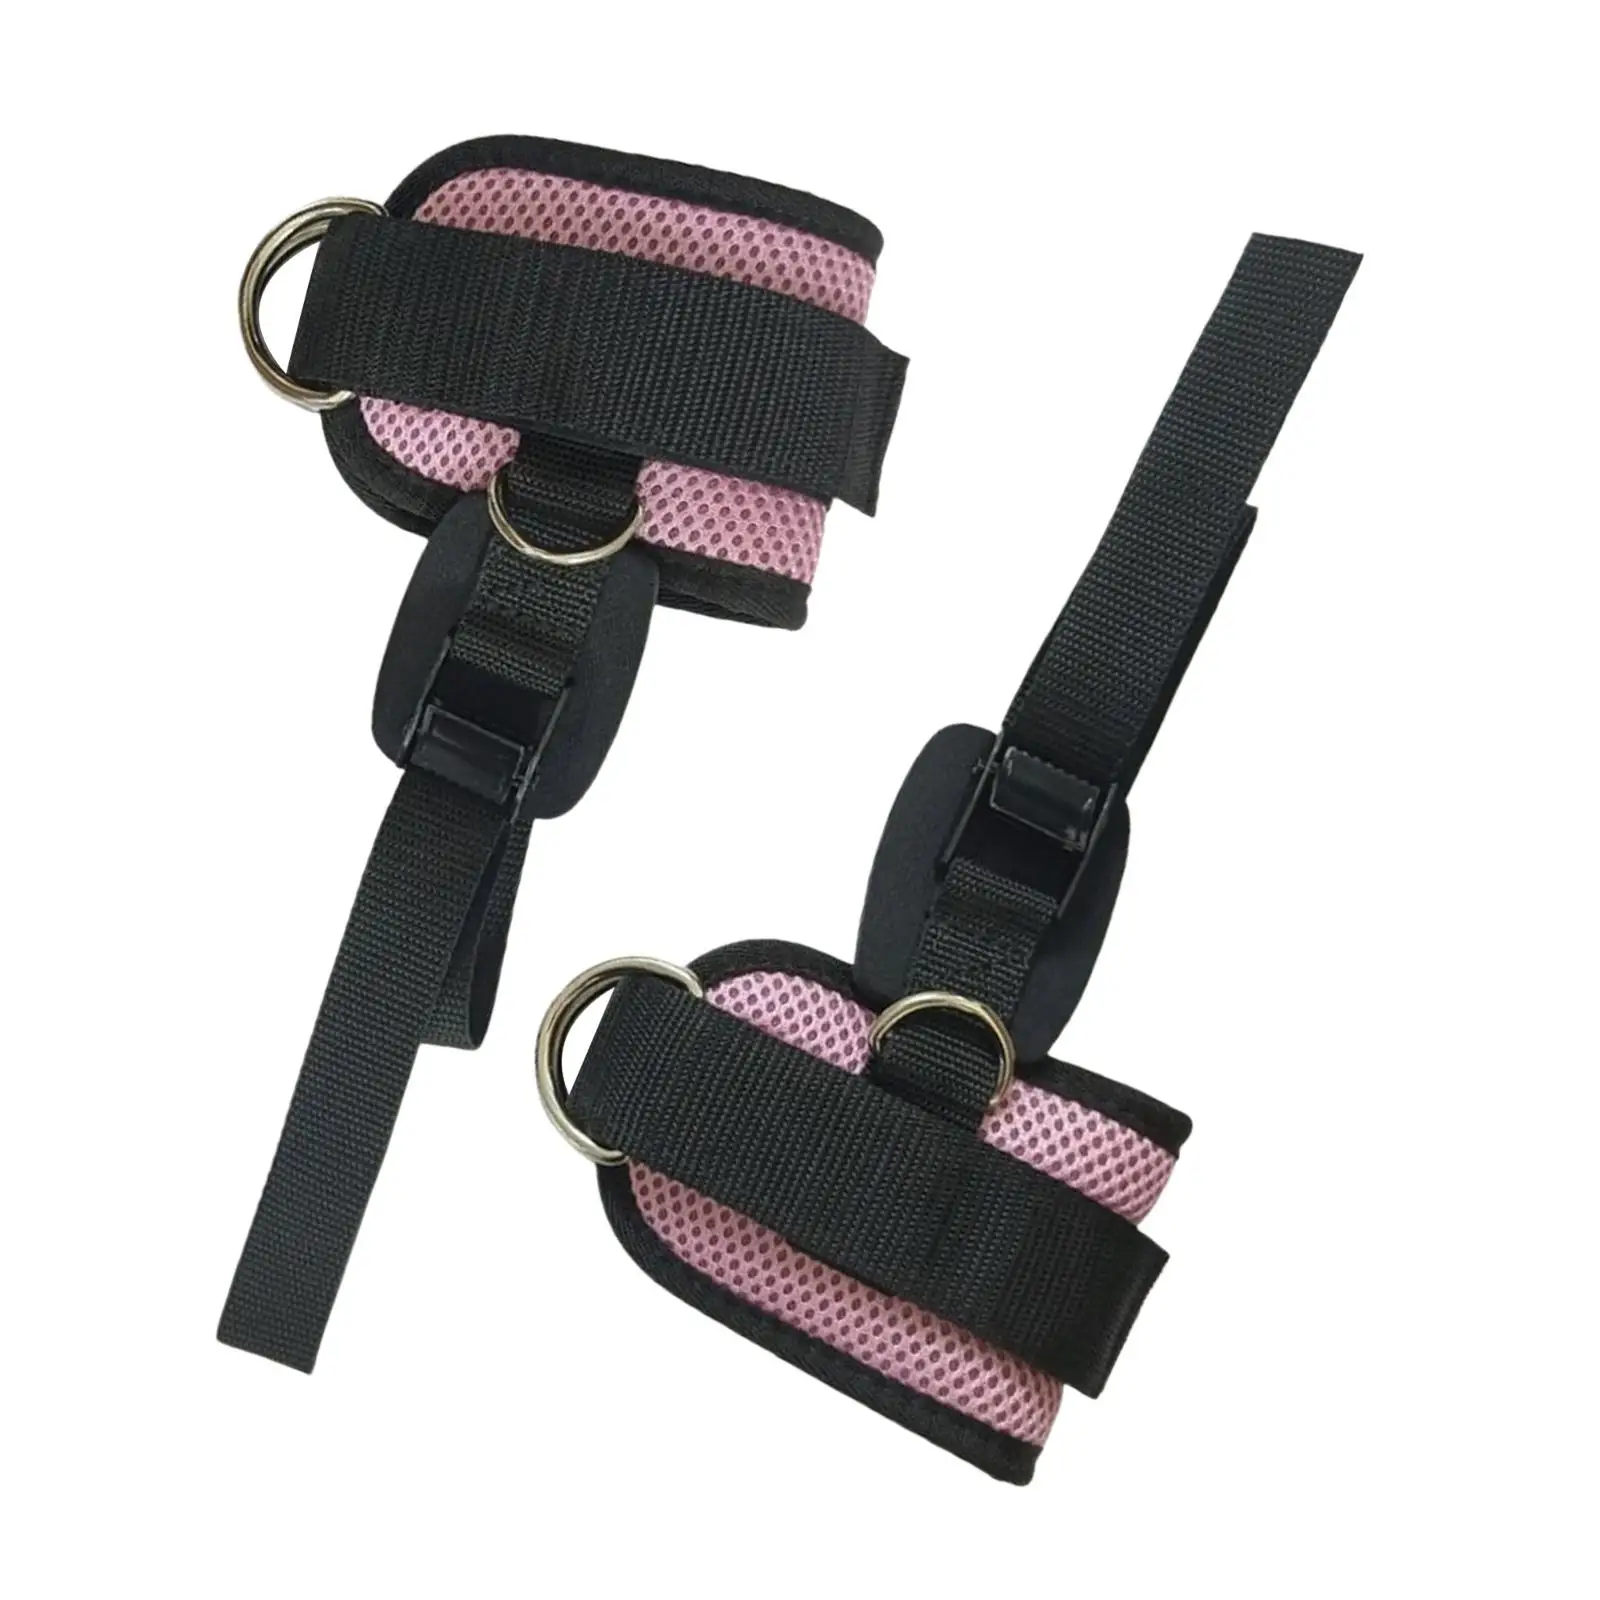 2 pieces Ankle Straps, Padded Ankle Cuffs for Gym Workouts, Cable Machines, Butt